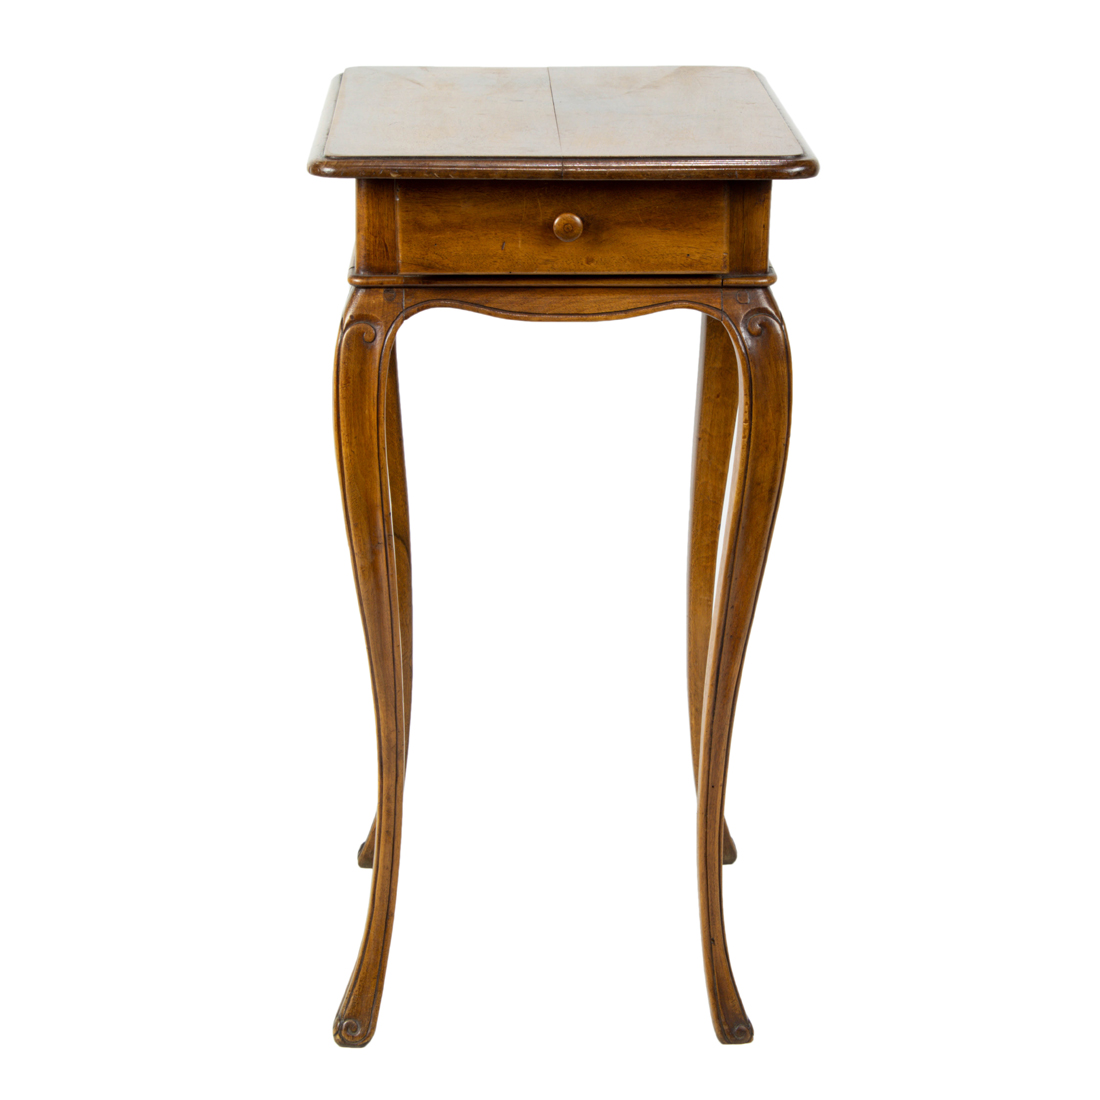 A LOUIS XV STYLE OCCASIONAL TABLE 2d1277